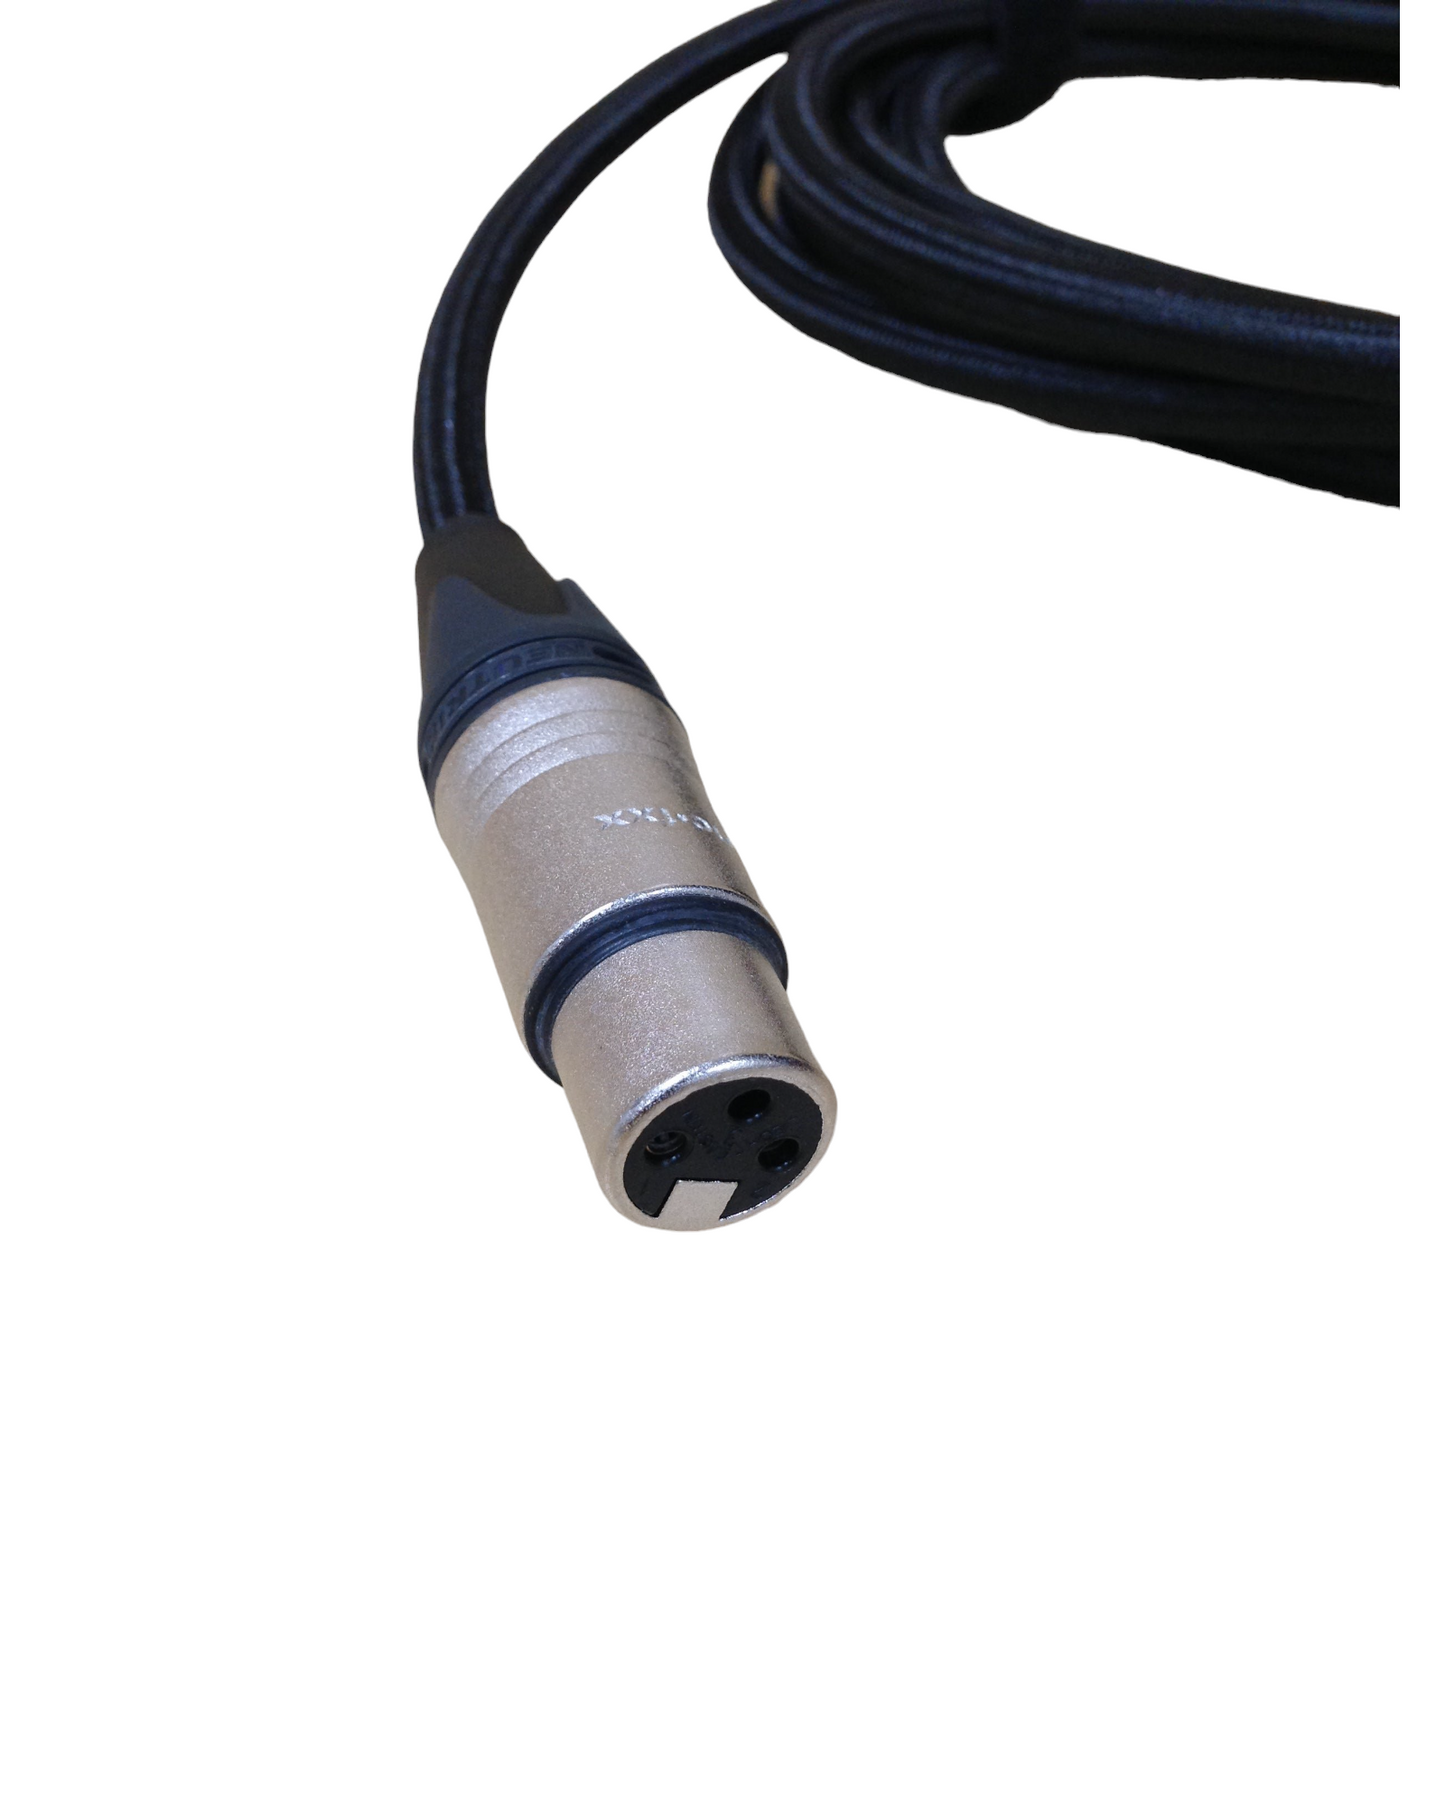 BoxKing OCC Microphone Cable/Lead,XLR-XLR,10FT(3M),3 Pin,All Silver Plated,Black